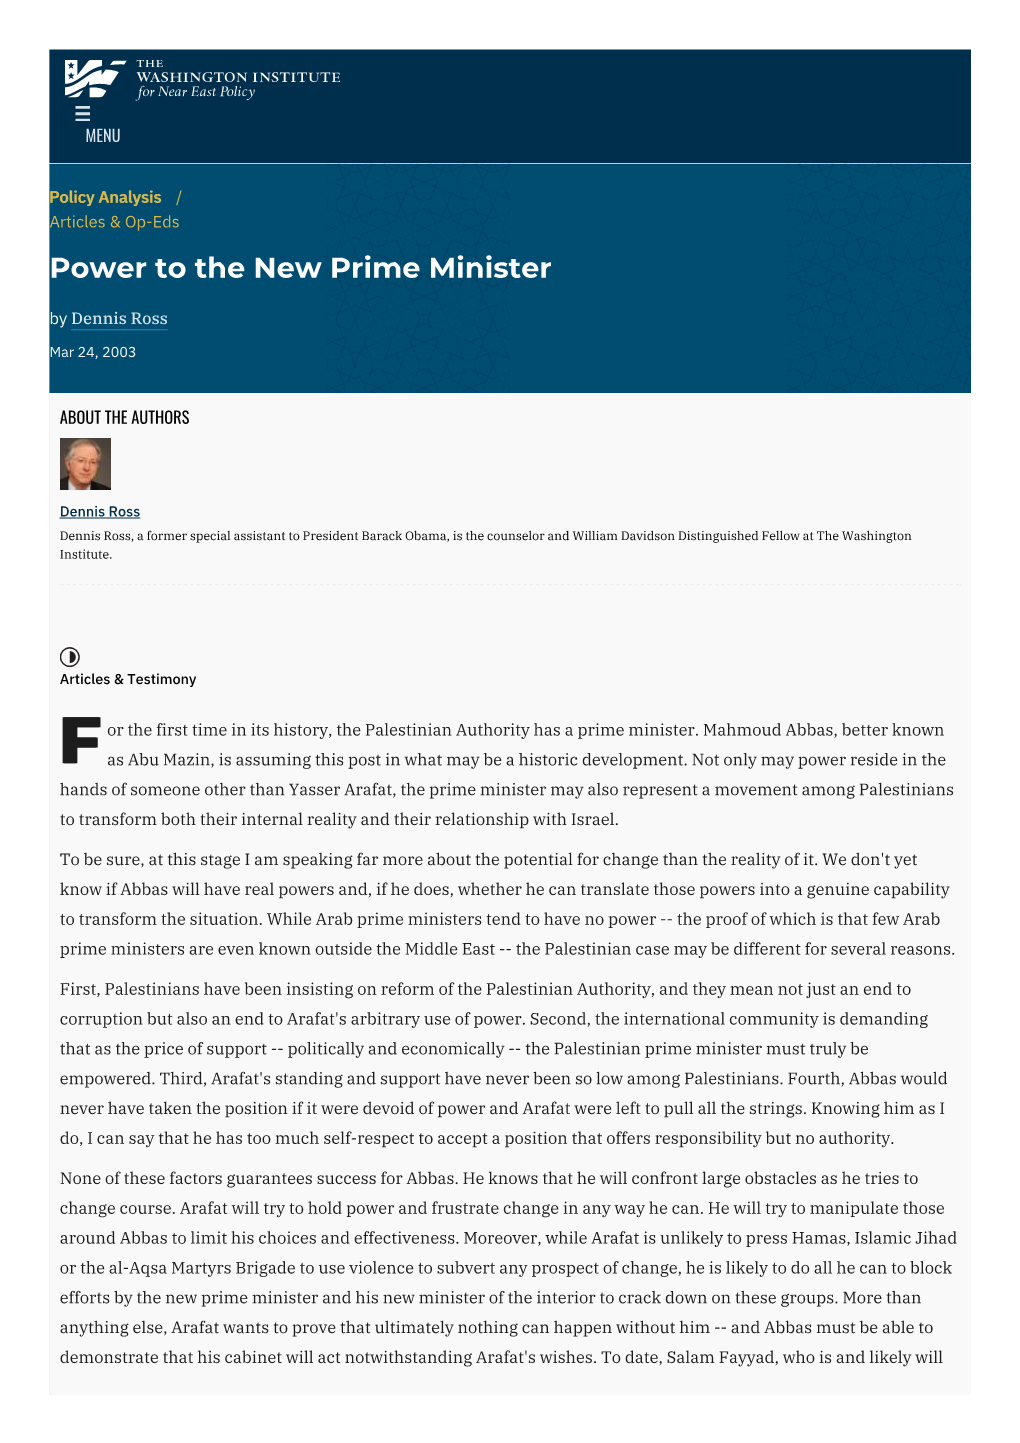 Power to the New Prime Minister | the Washington Institute